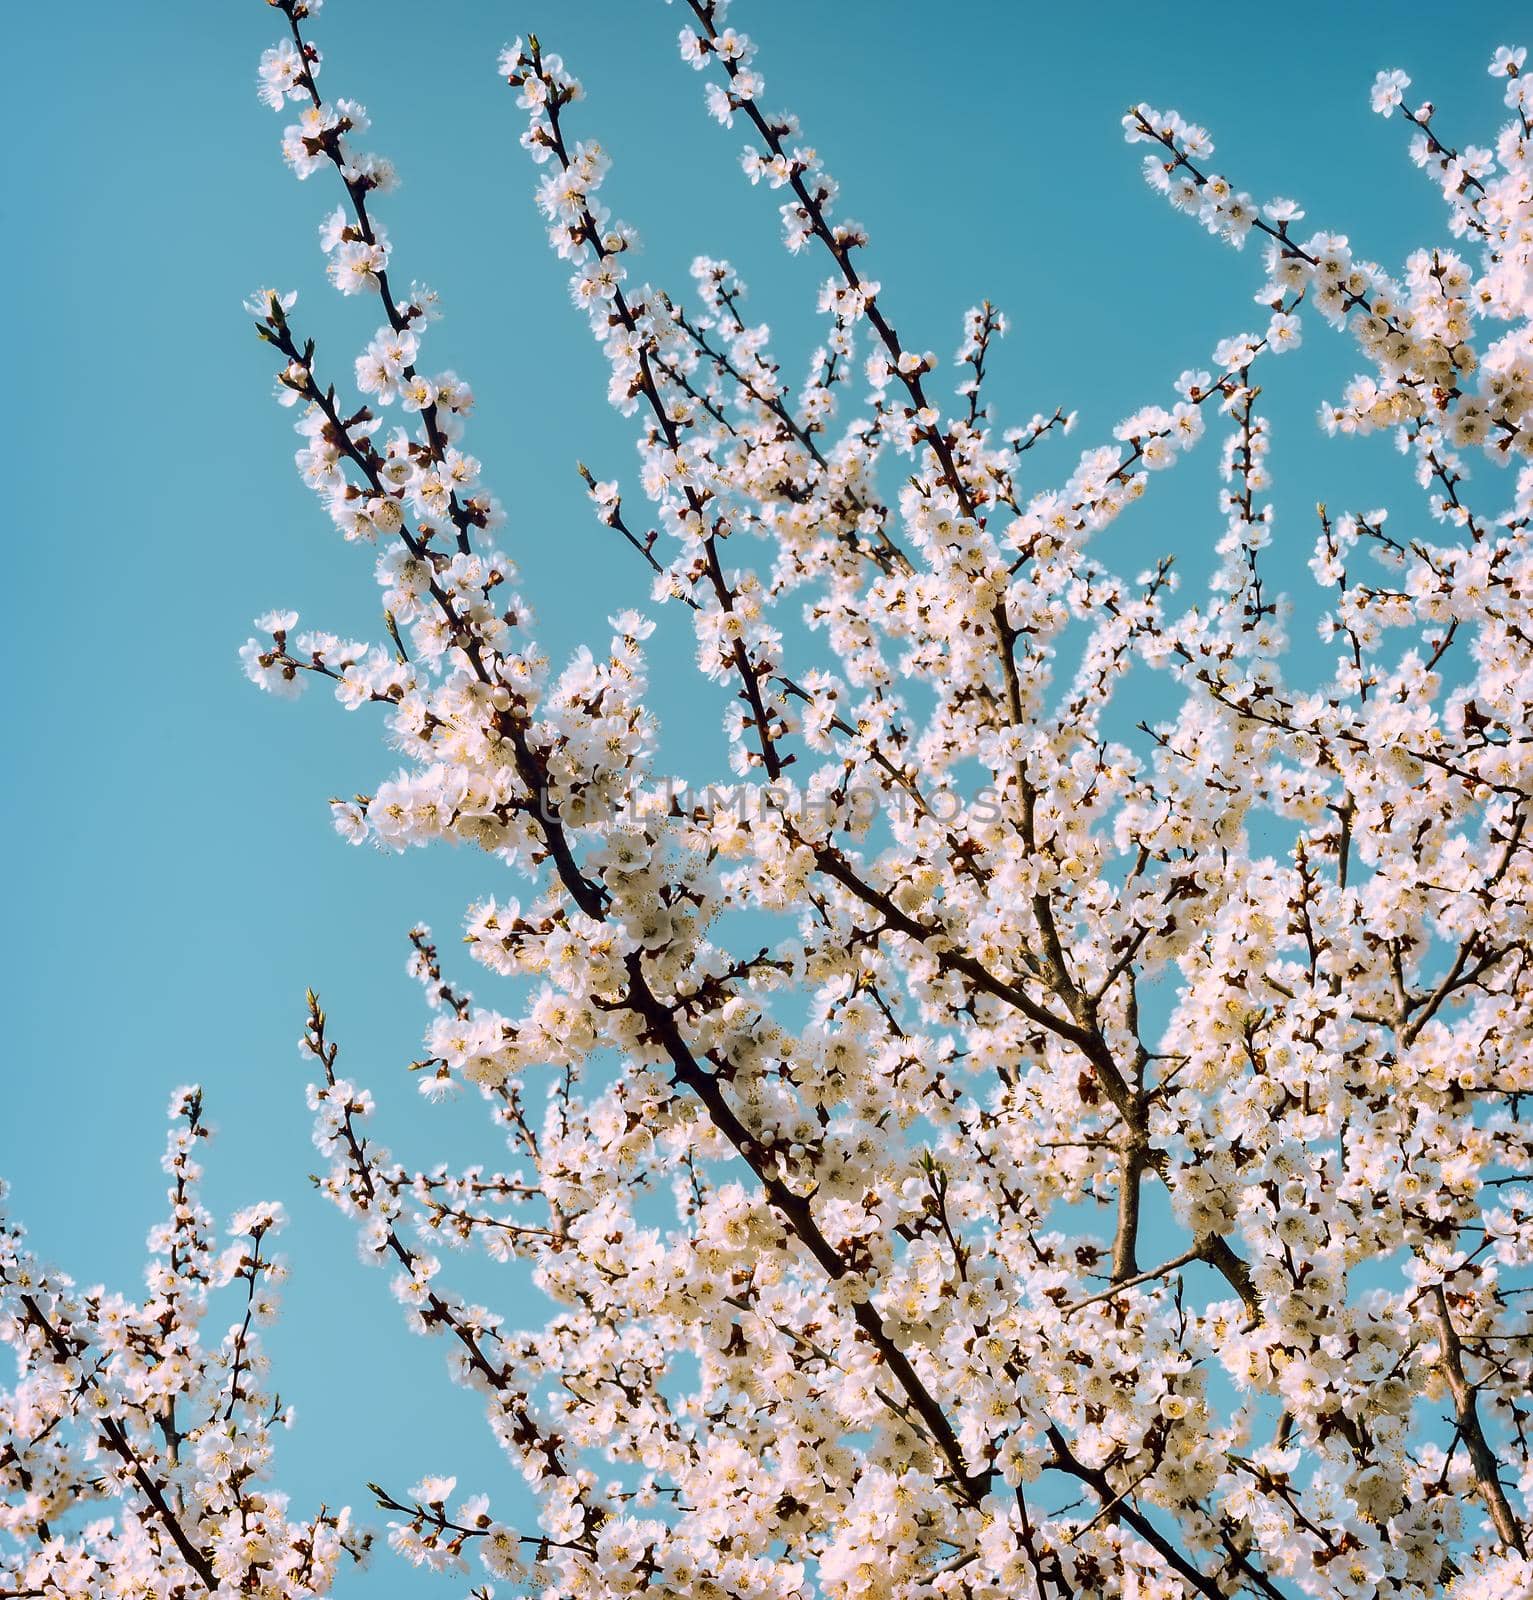 Apricot branch with lots of light pink flowers on a blue sky background.